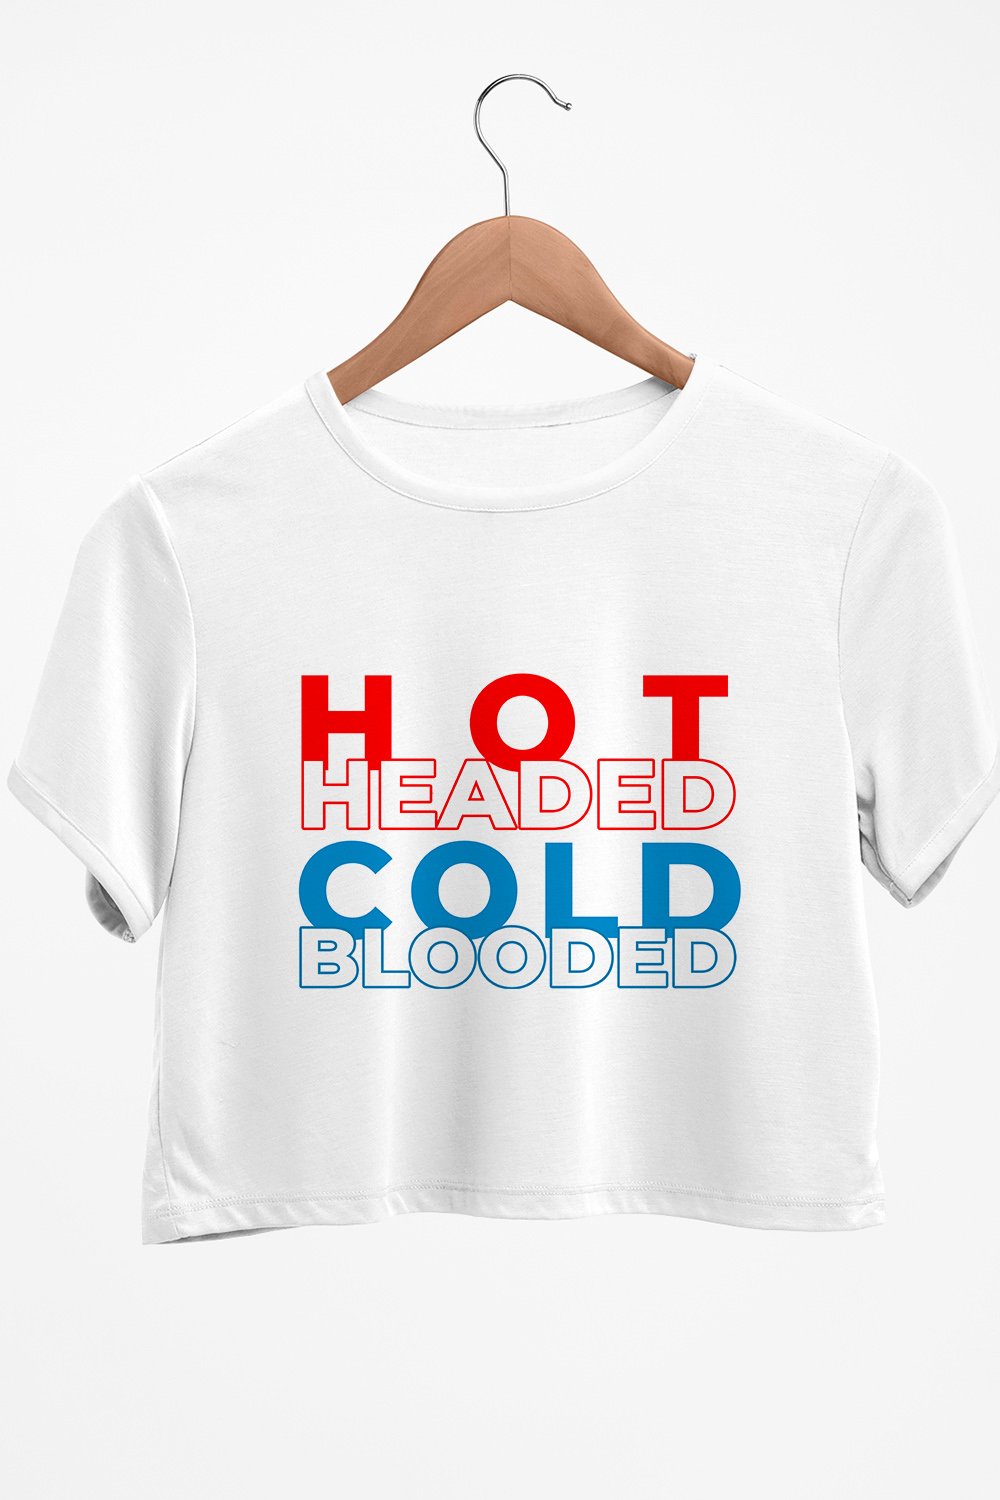 Hot Headed Cold Blooded Graphic Printed White Crop Top